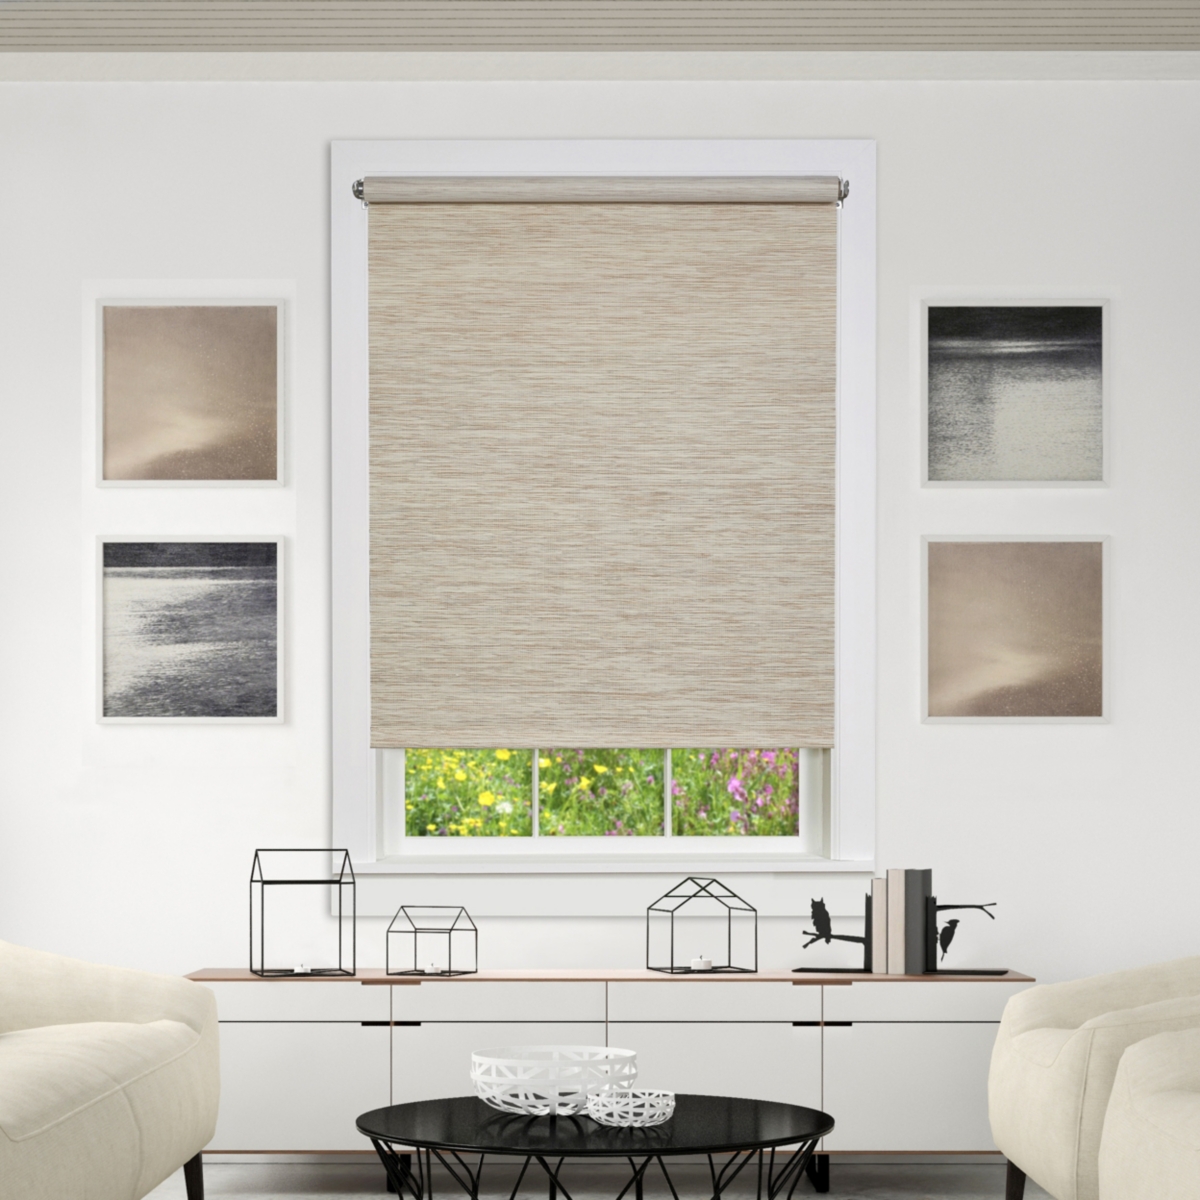 Cords Free Privacy Jute Window Shade, 39" x 72" - Natural